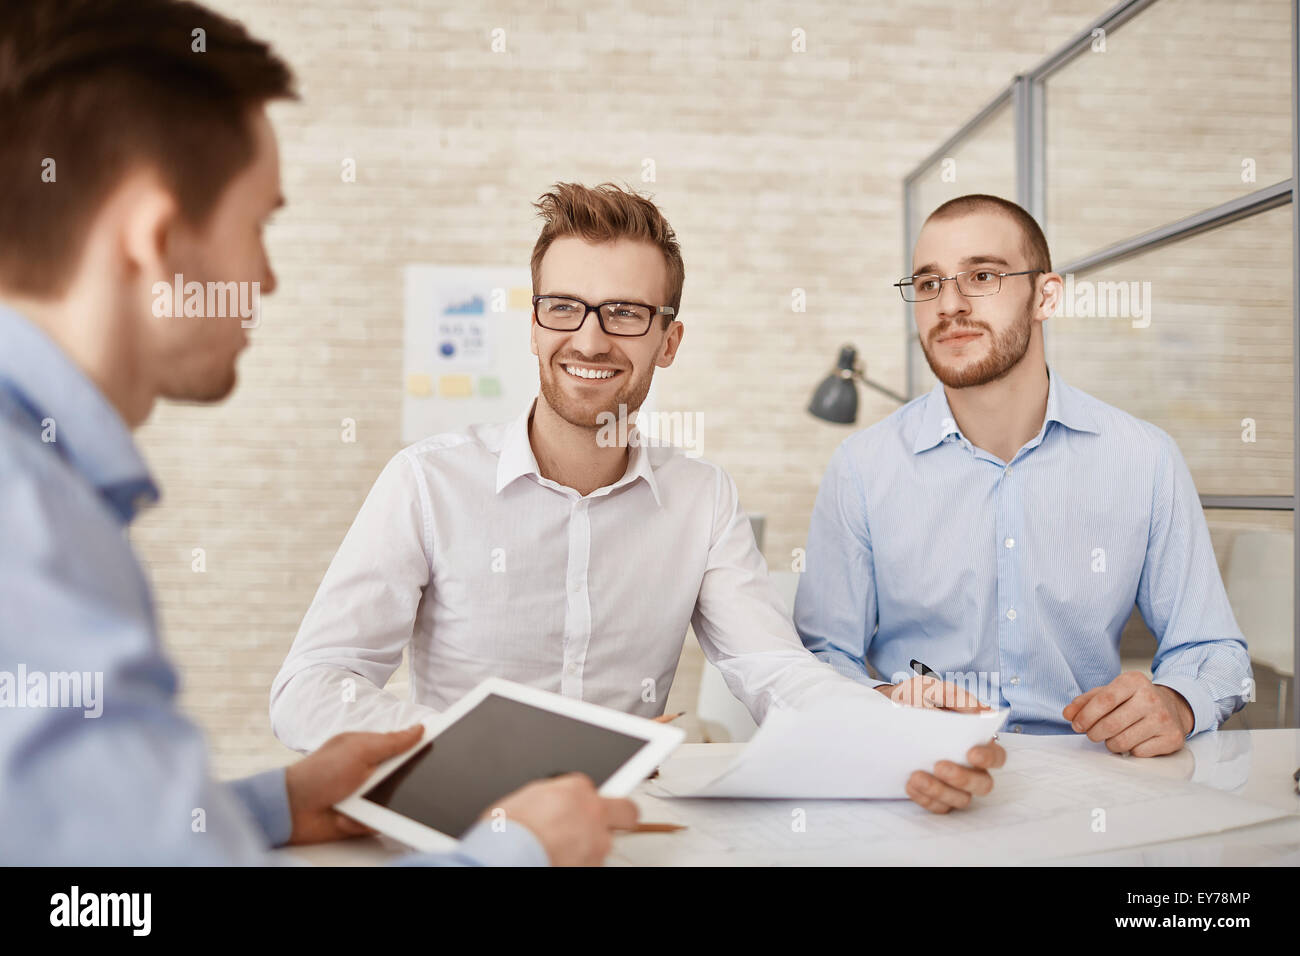 Three businessmen discussing plans and strategies at meeting Stock Photo